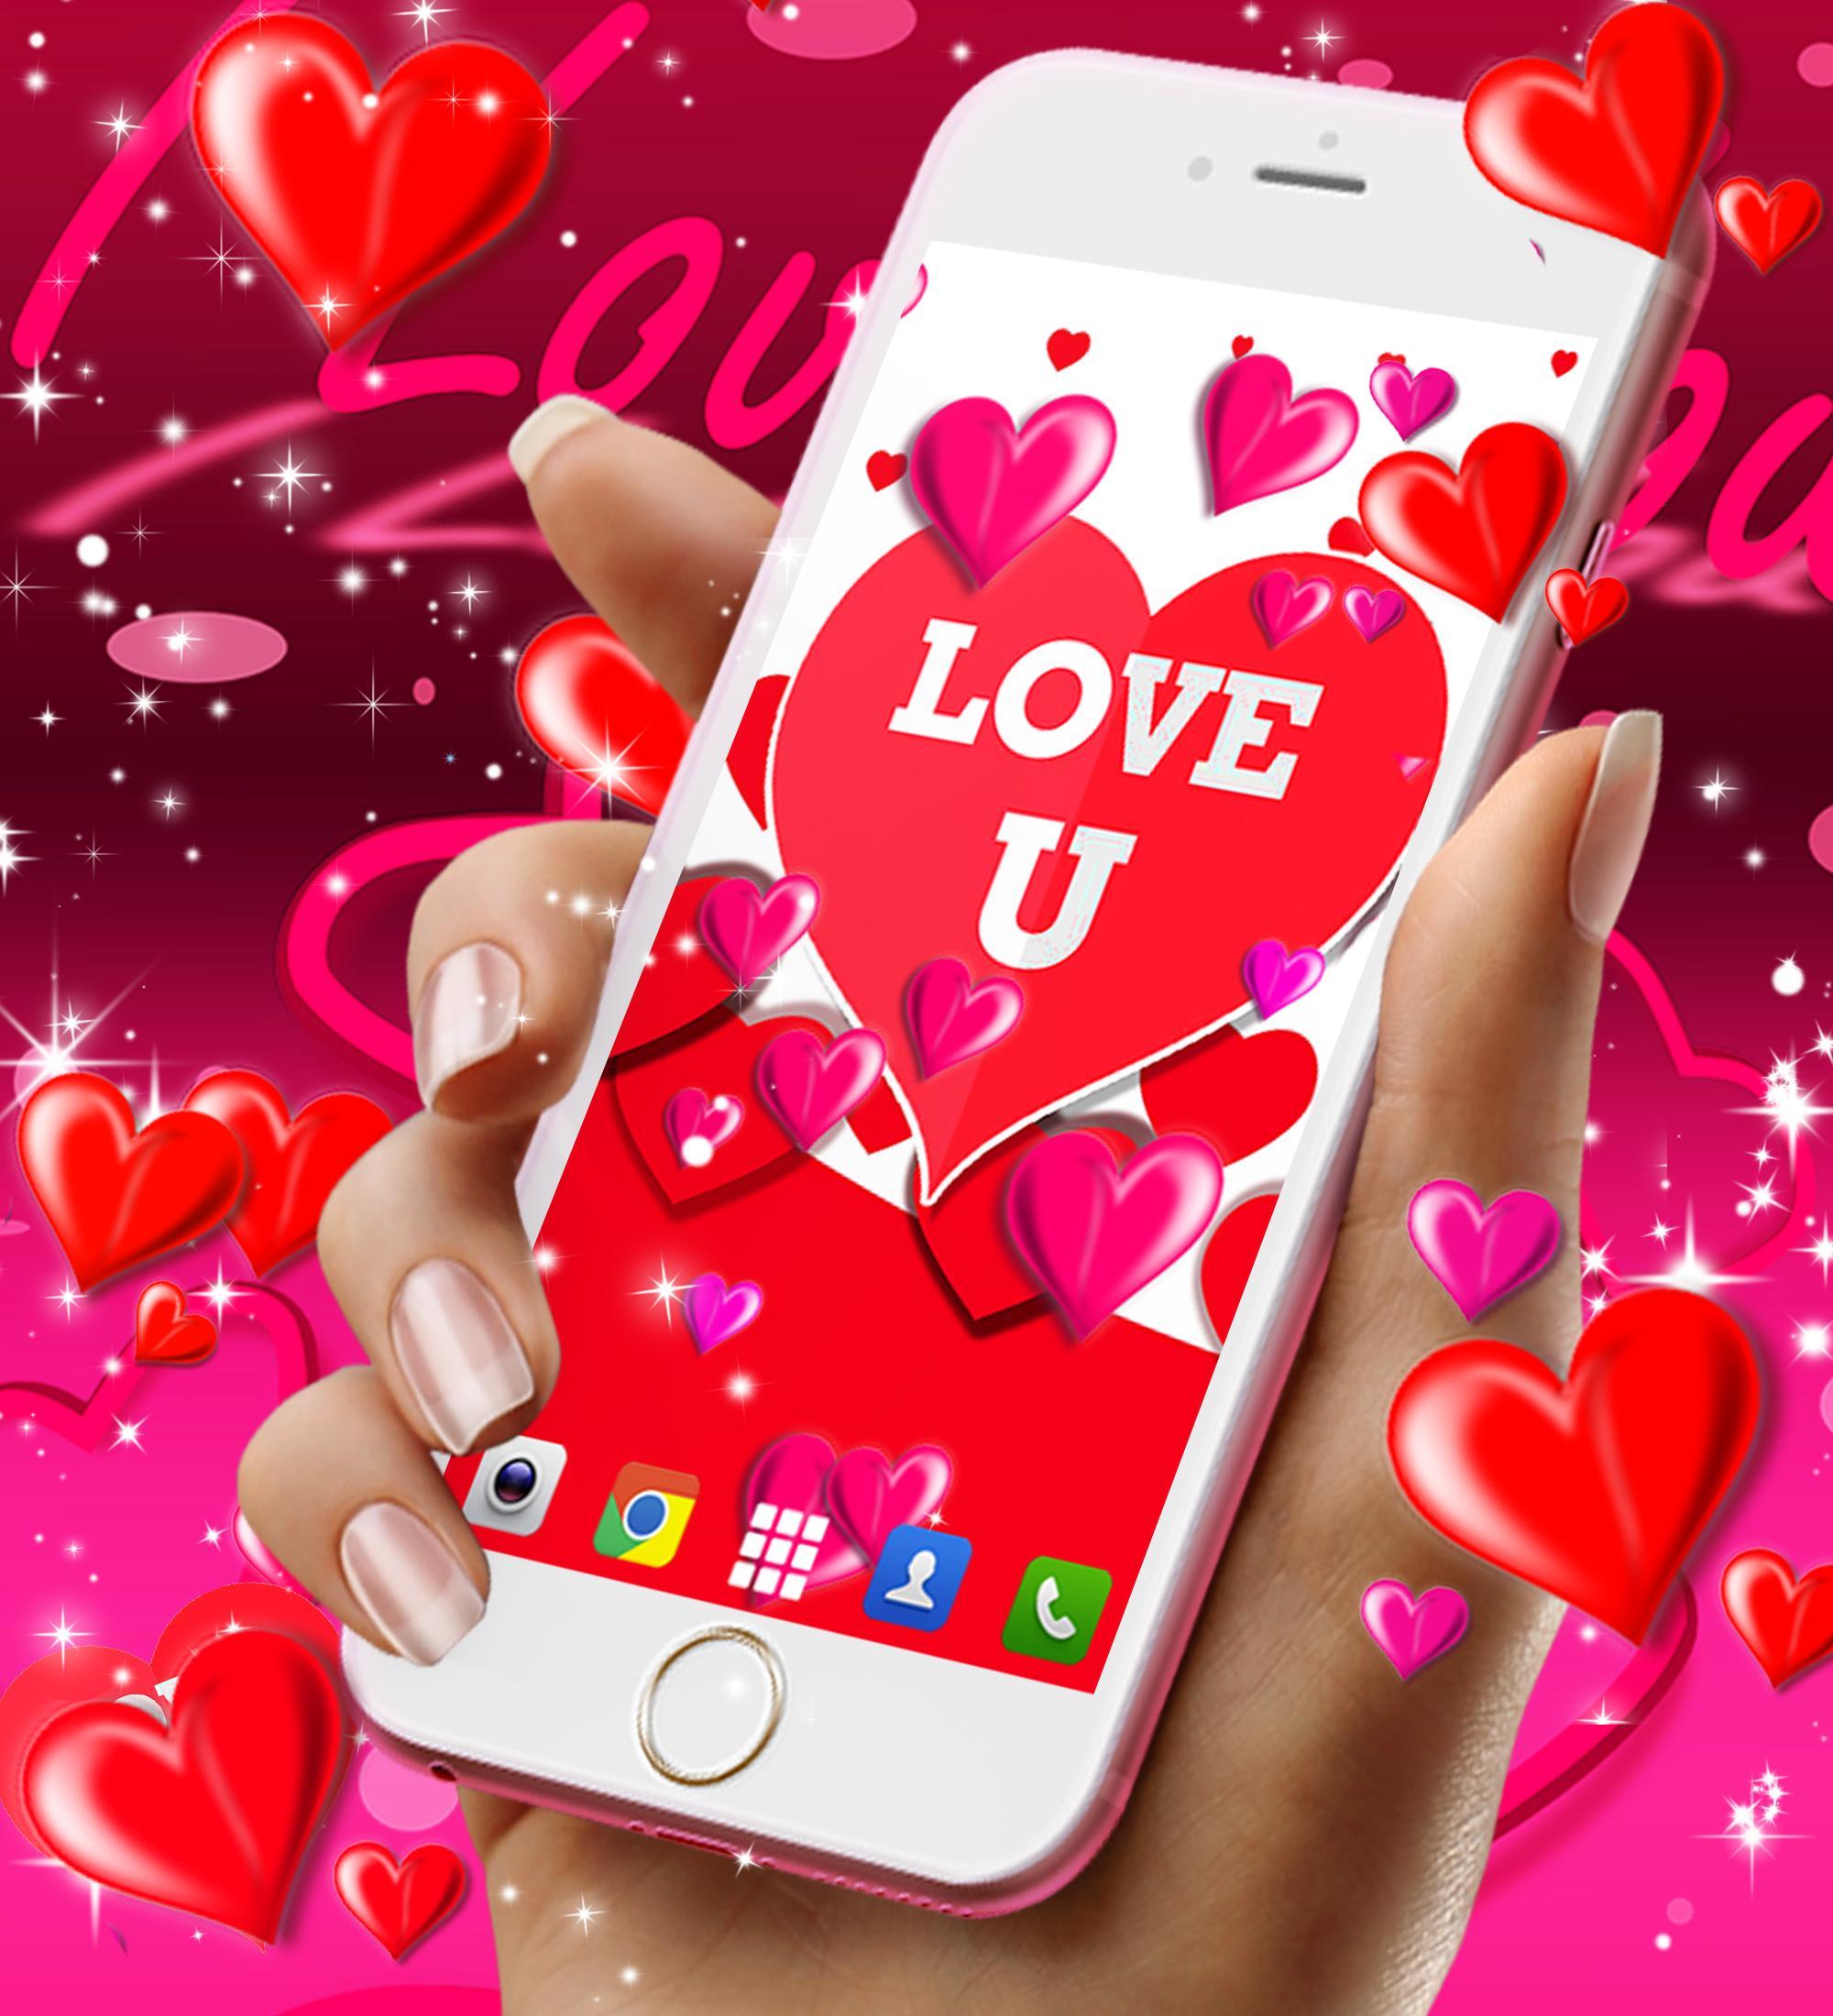 I Love You Live Wallpaper For Android Apk Download - Dil Love You New Photo Download , HD Wallpaper & Backgrounds